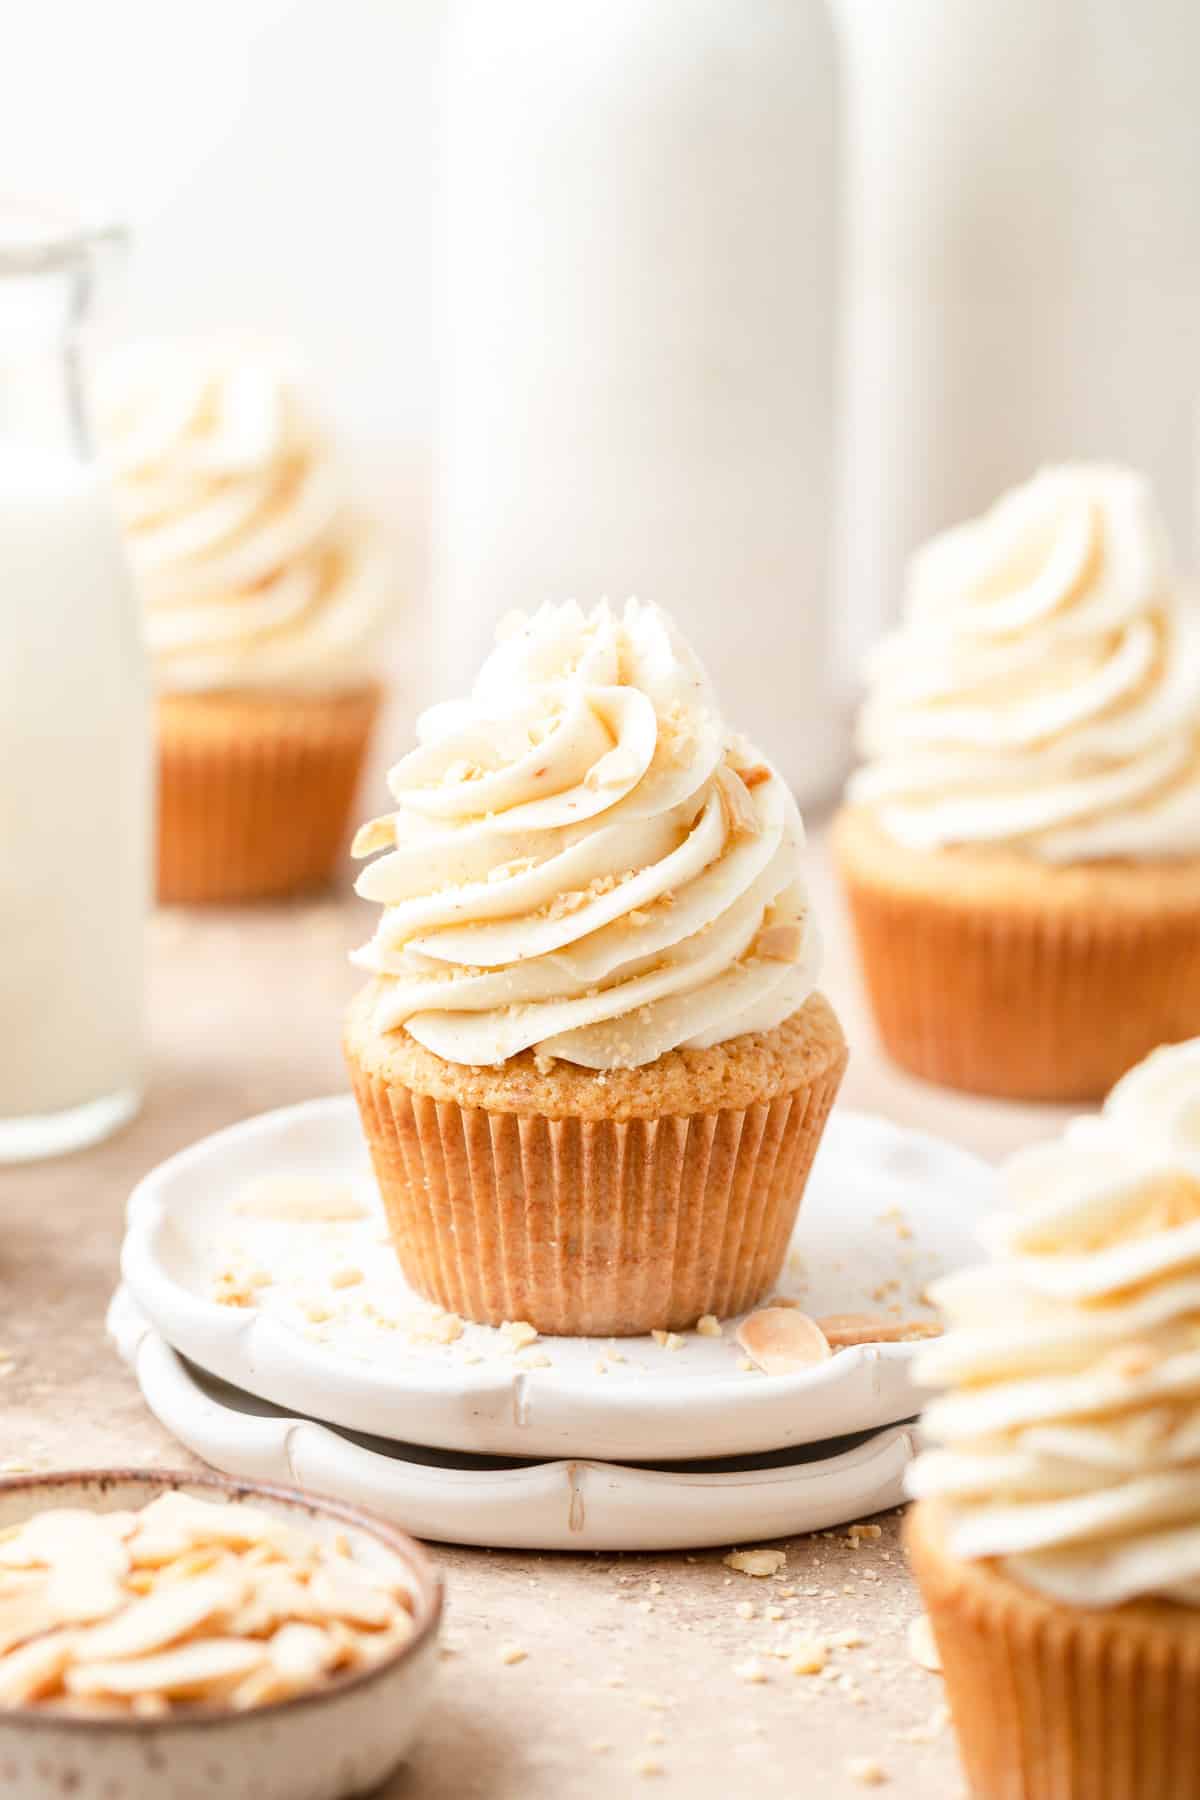 brown butter almond cupcakes with toasted almonds.